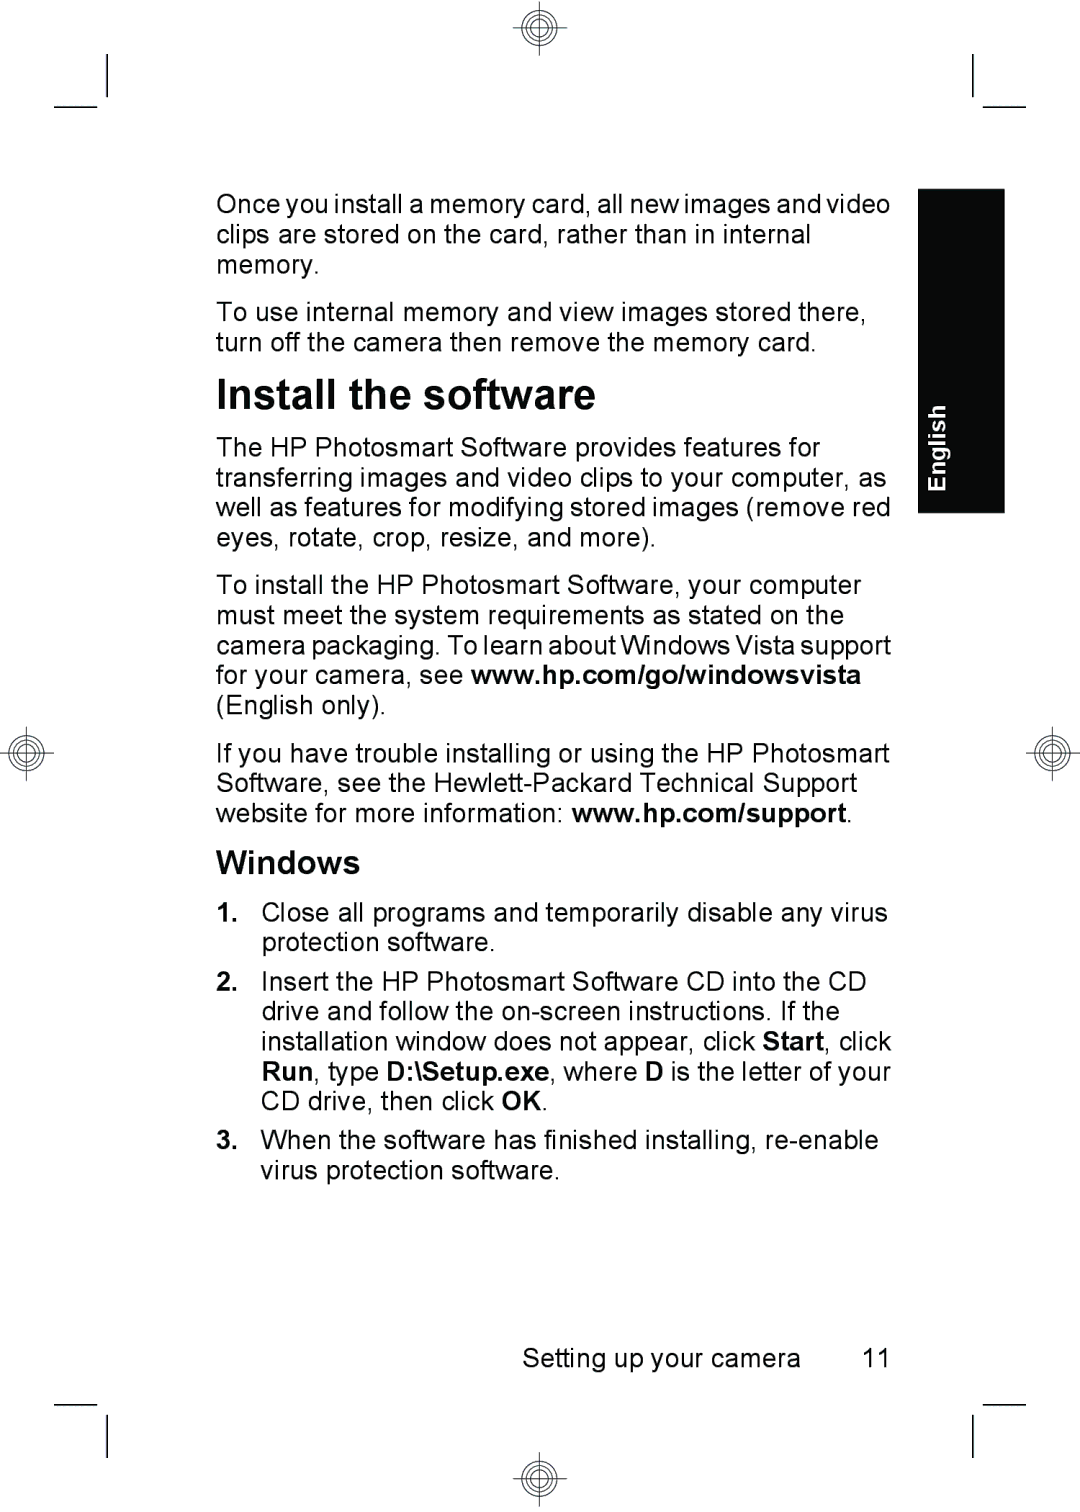 HP M630, M440, M540 manual Install the software, Windows 